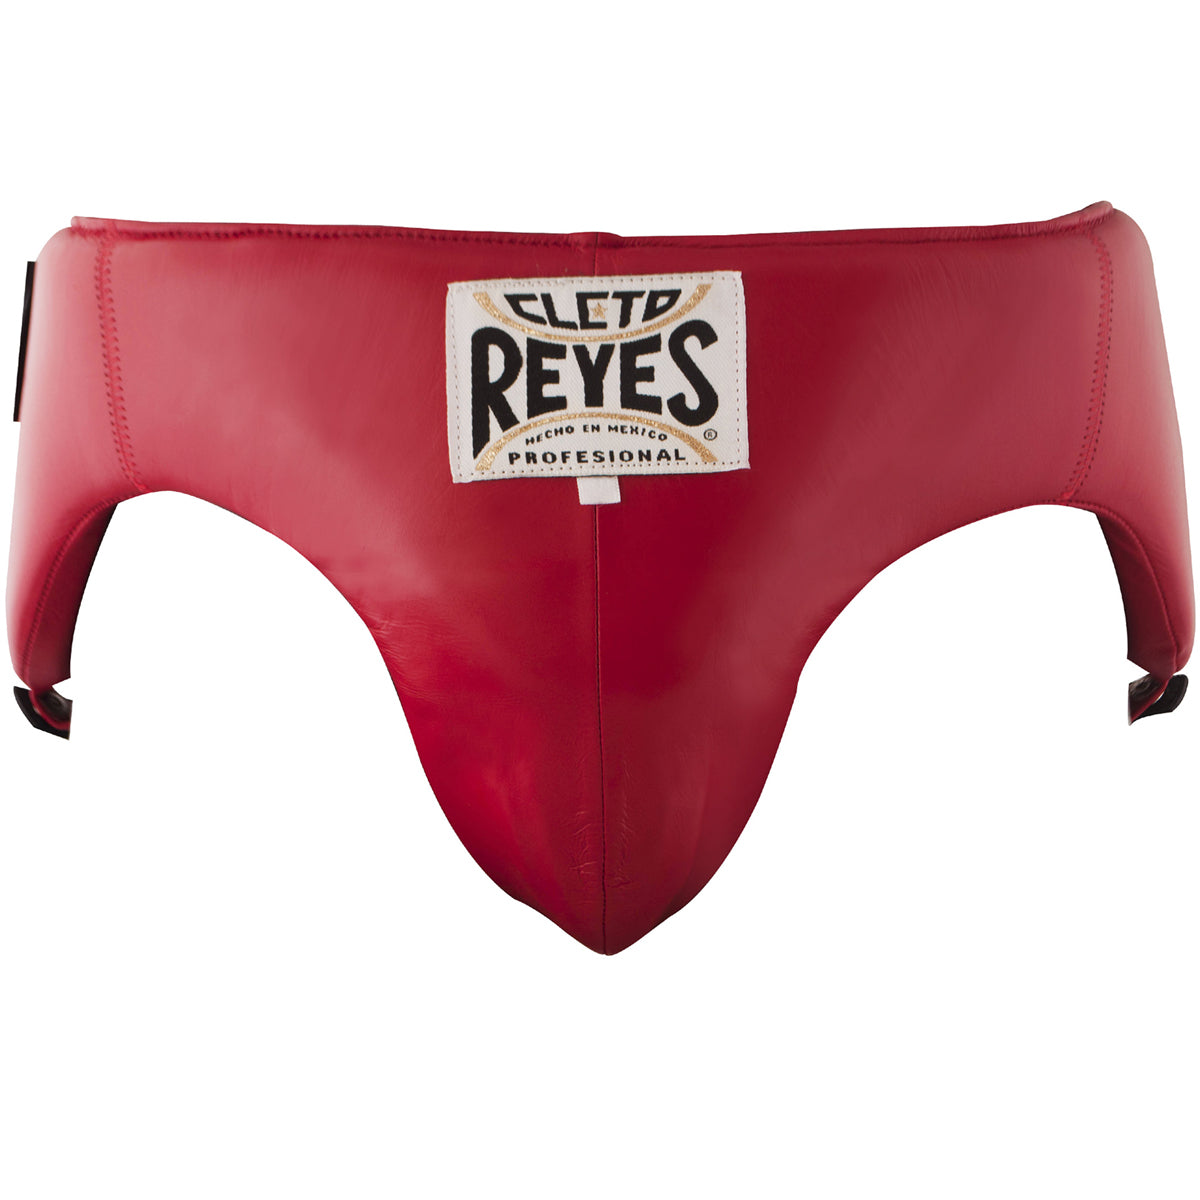 Cleto Reyes Traditional No-Foul Padded Protective Cup - Large (36-38") - Red Cleto Reyes